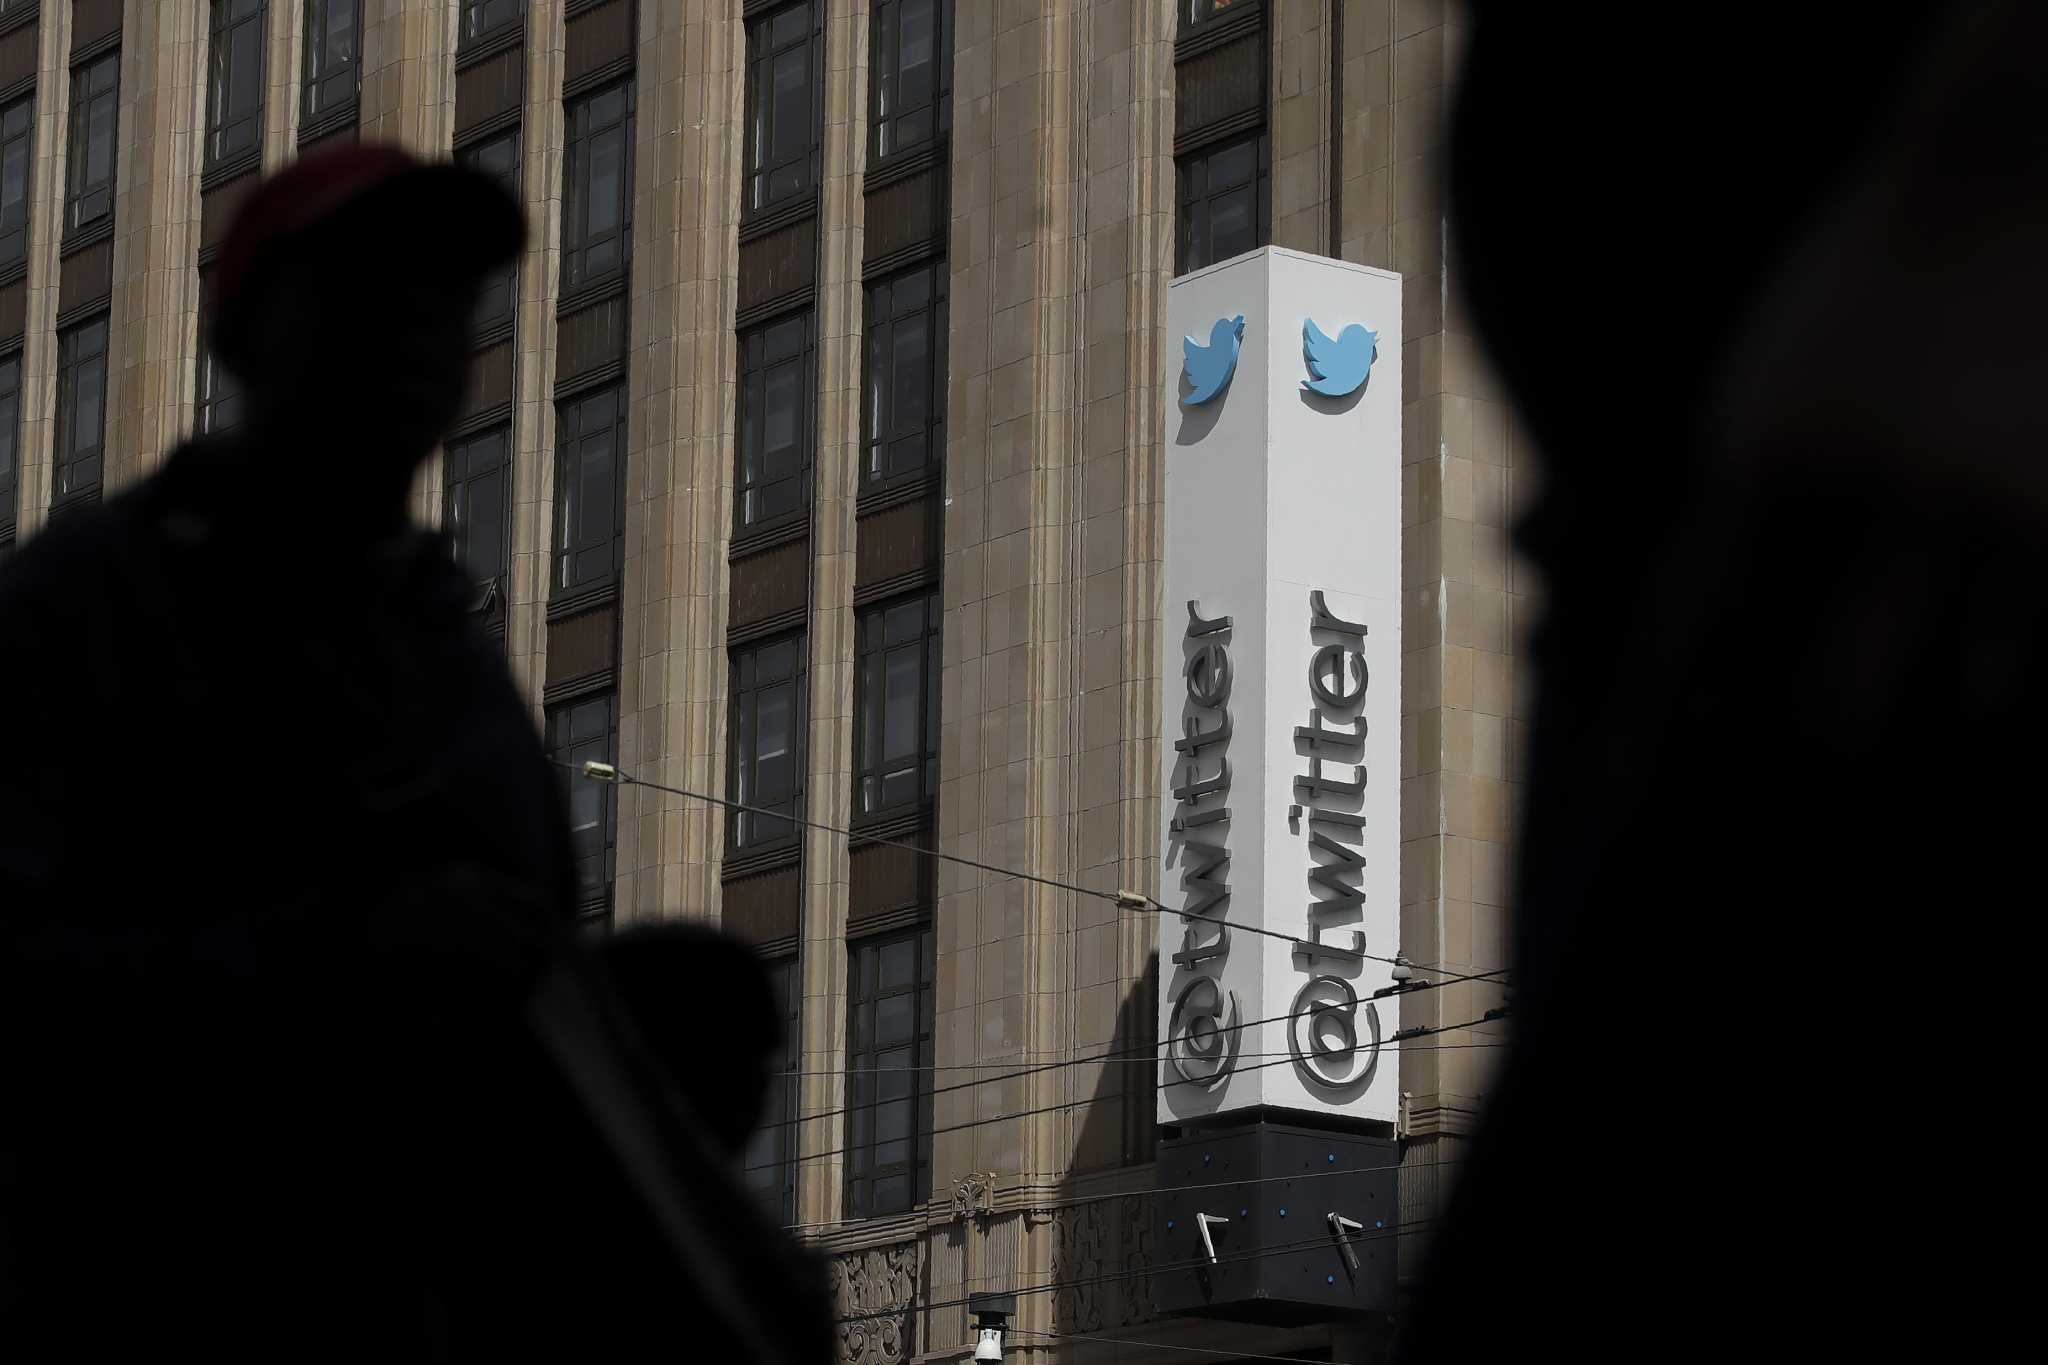 Twitter allegedly has illegal bedrooms at headquarters, SF officials investigate